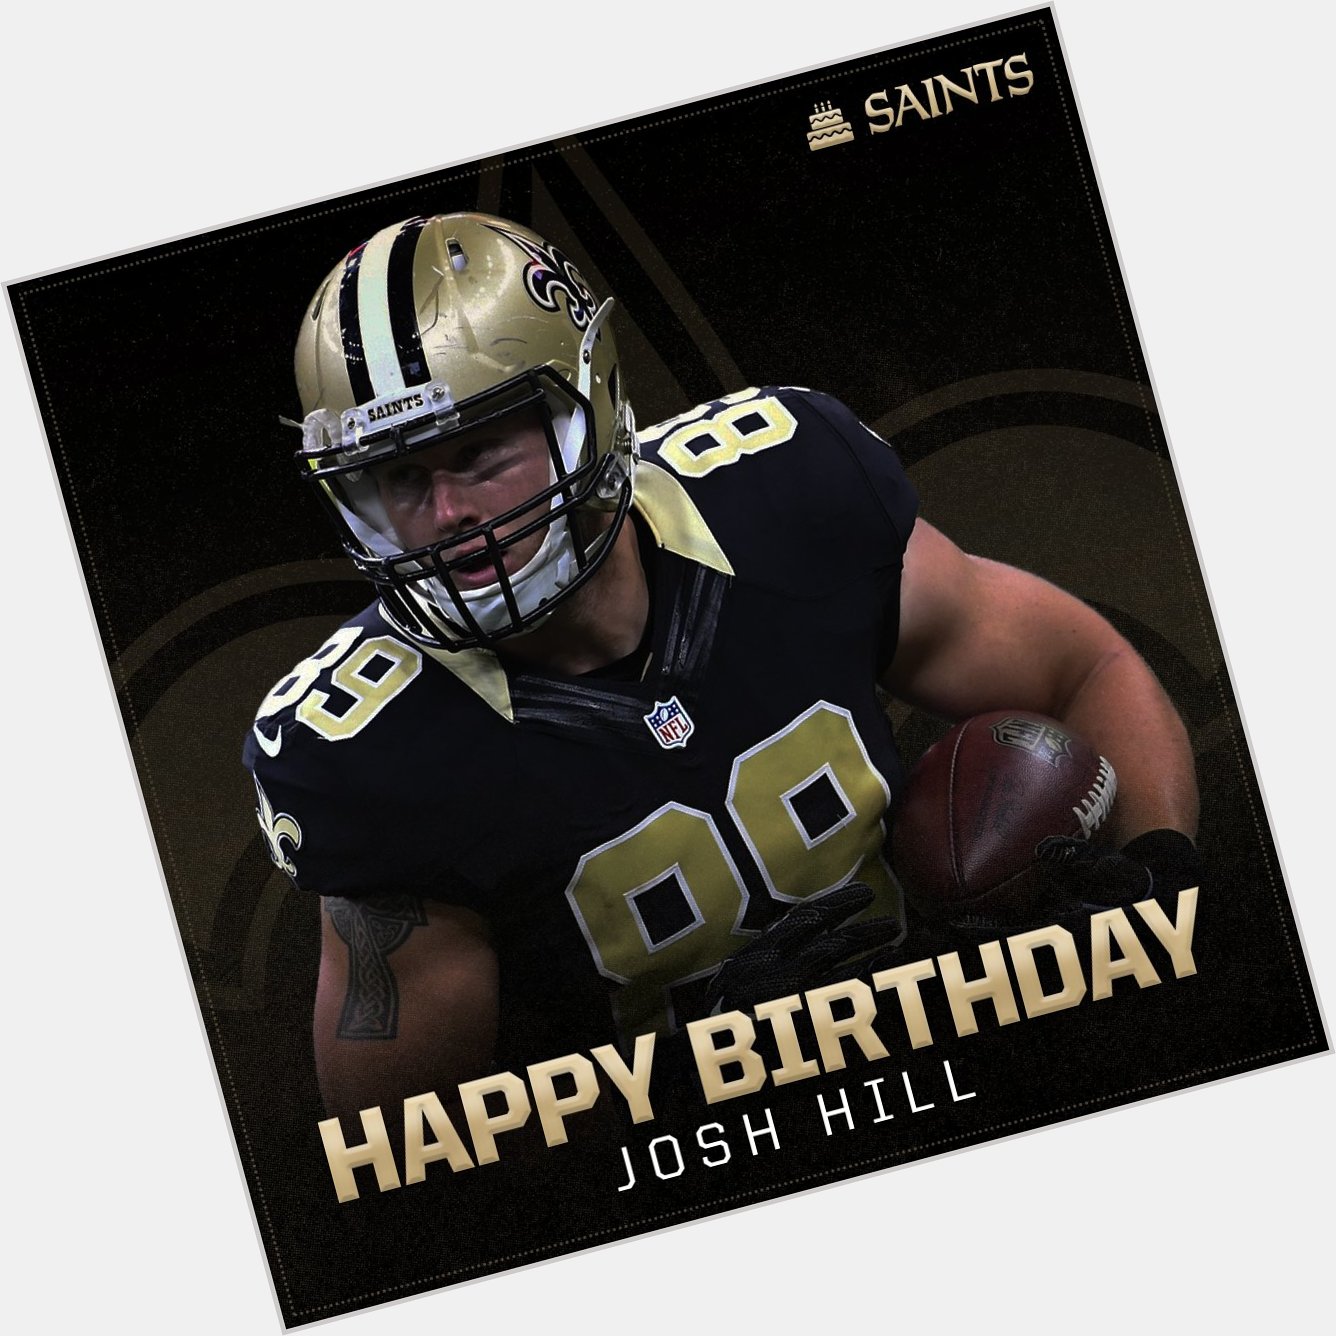 Join us in wishing a Happy Birthday to Josh Hill! 